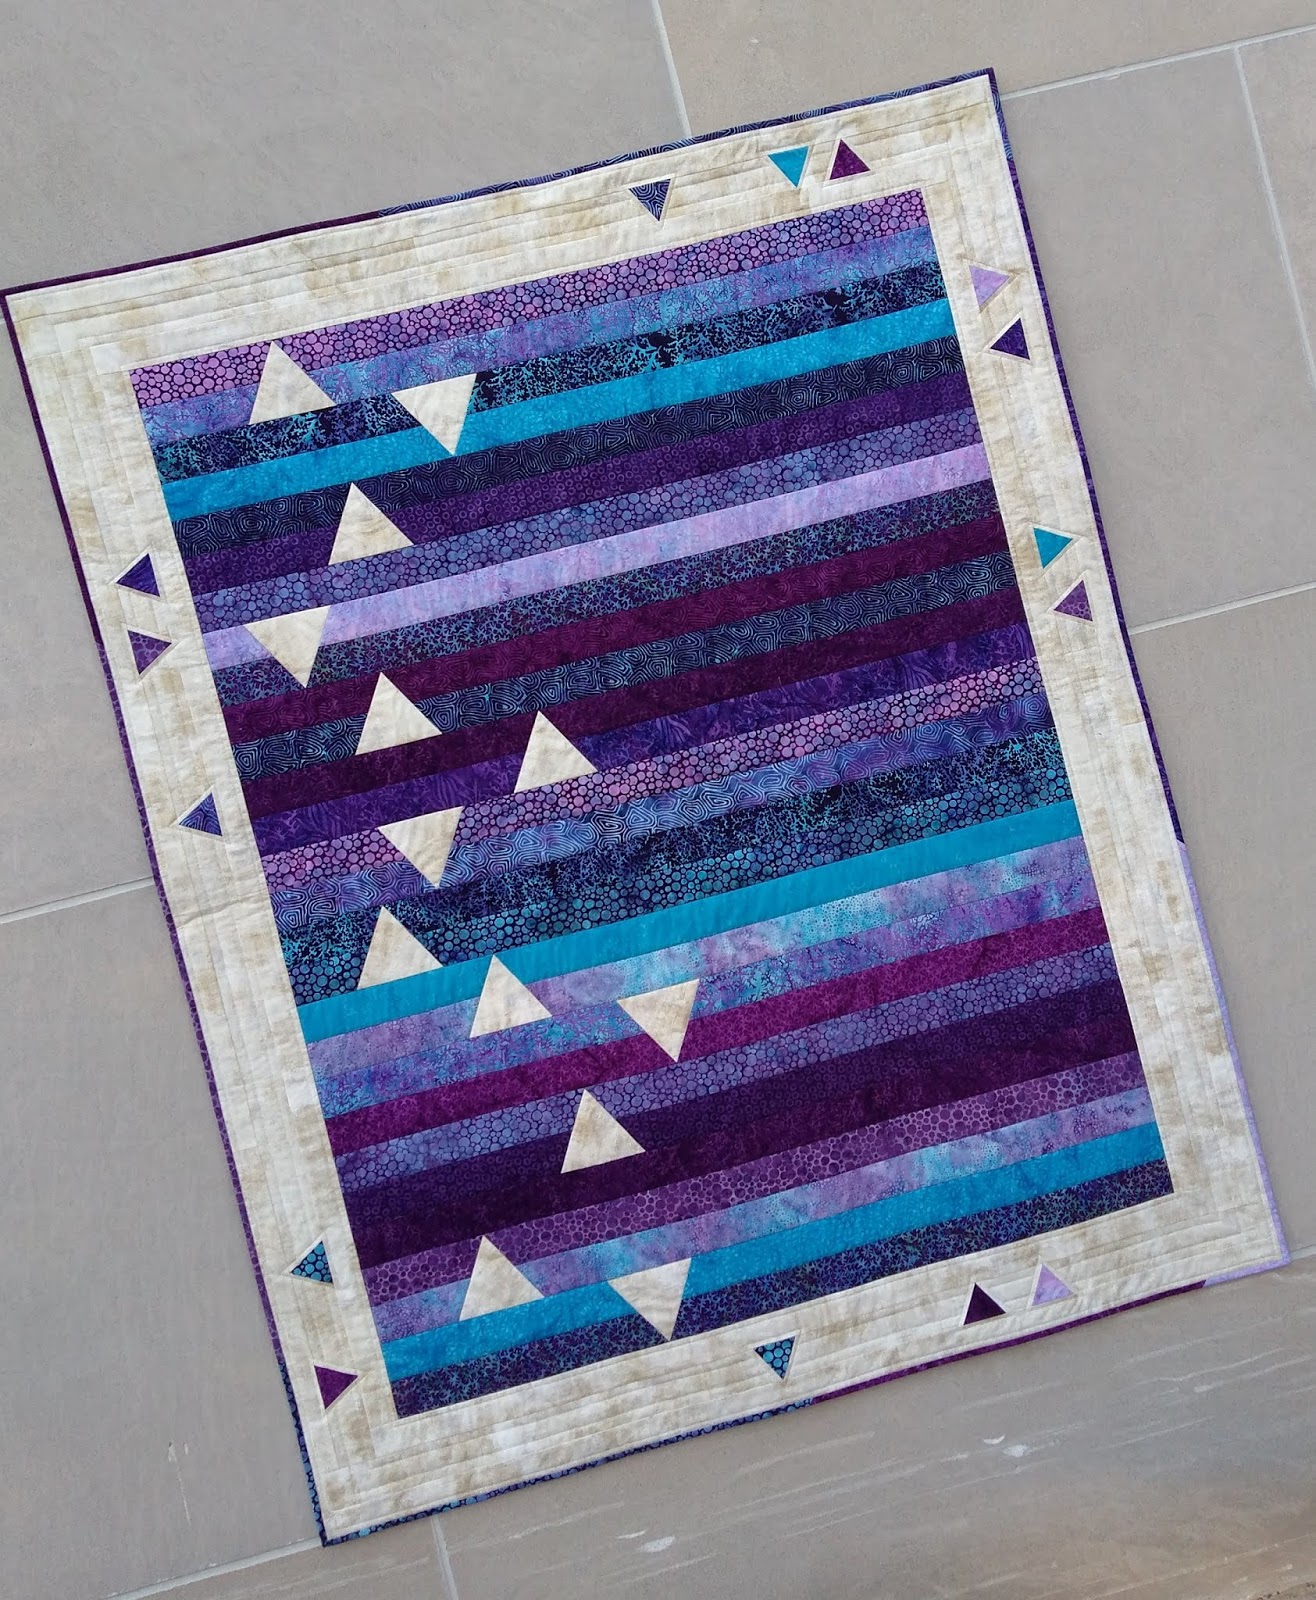 Canuck Quilter: March 2020